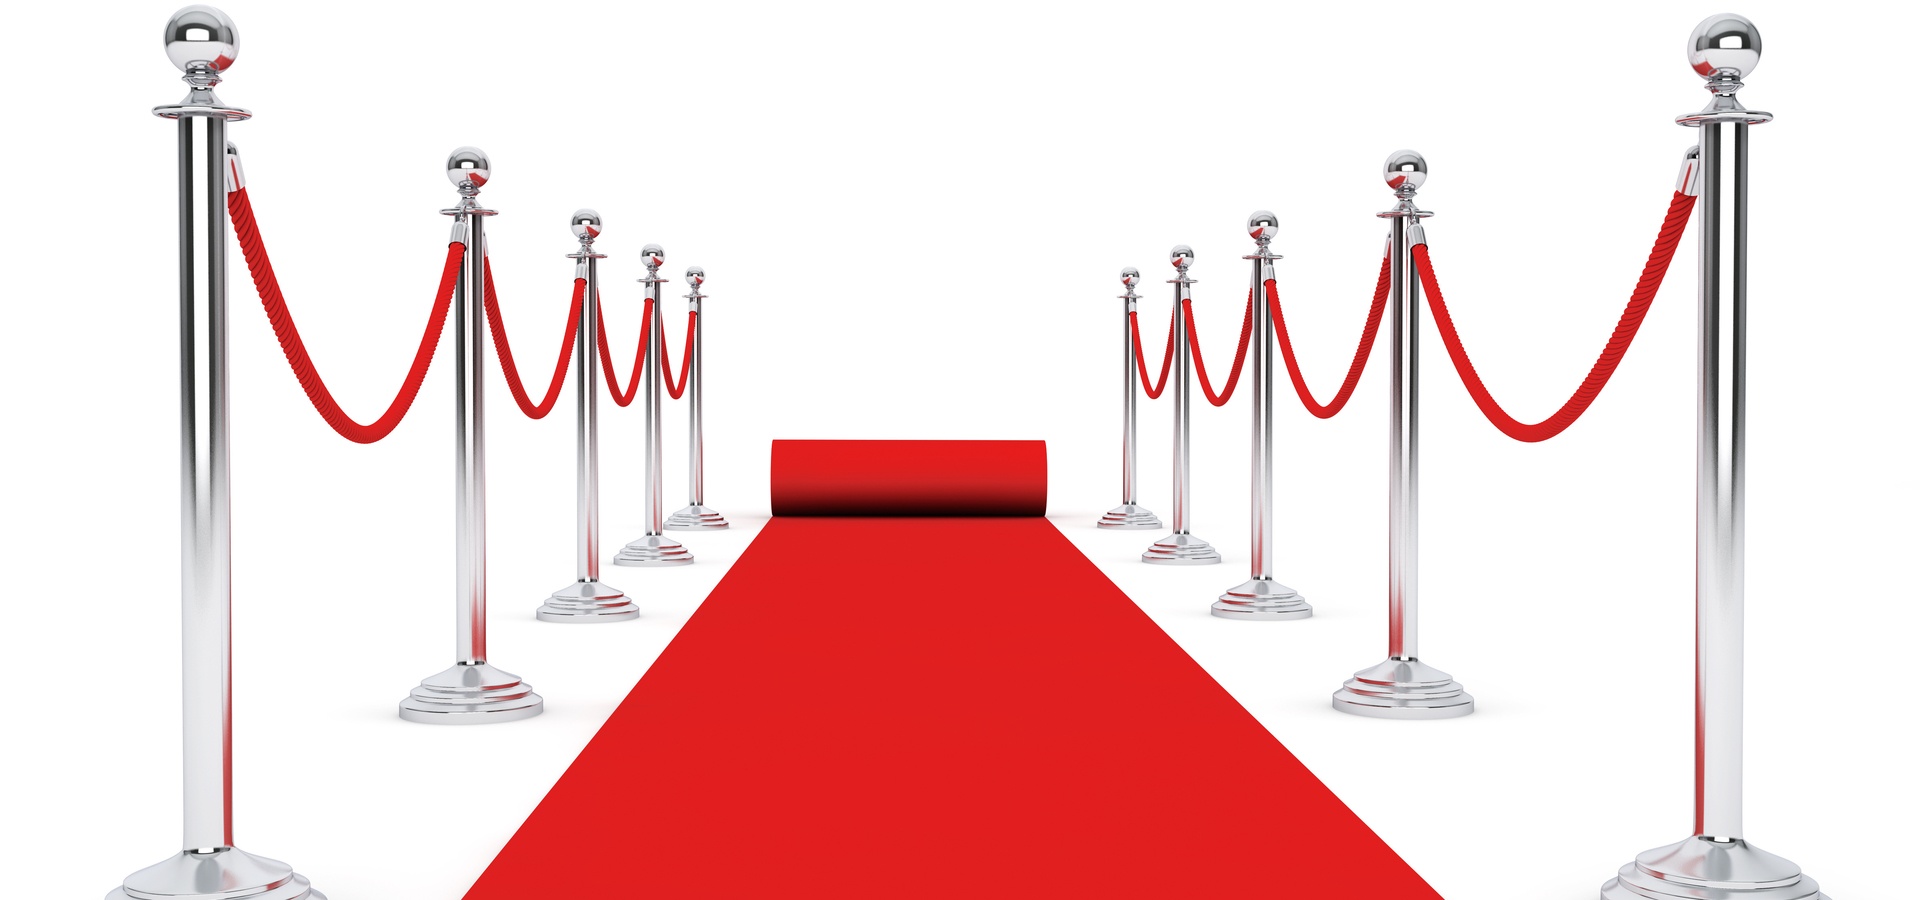 A roped off red carpet